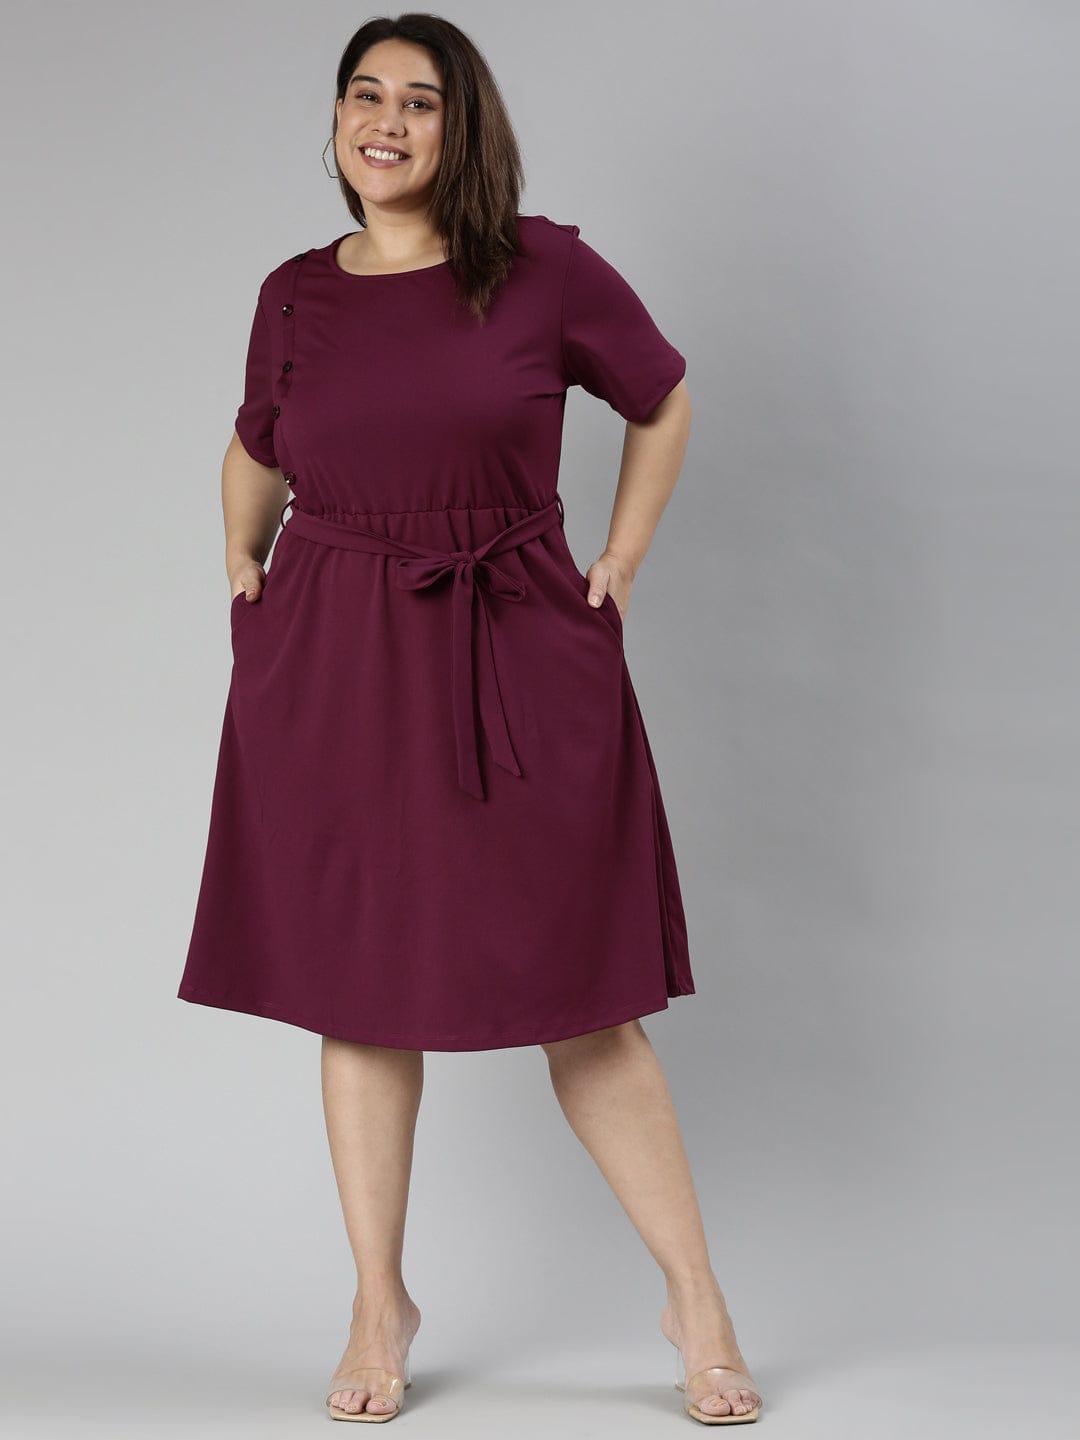 TheShaili - Women's Plum solid A-line maxi dress with pleat at front yoke